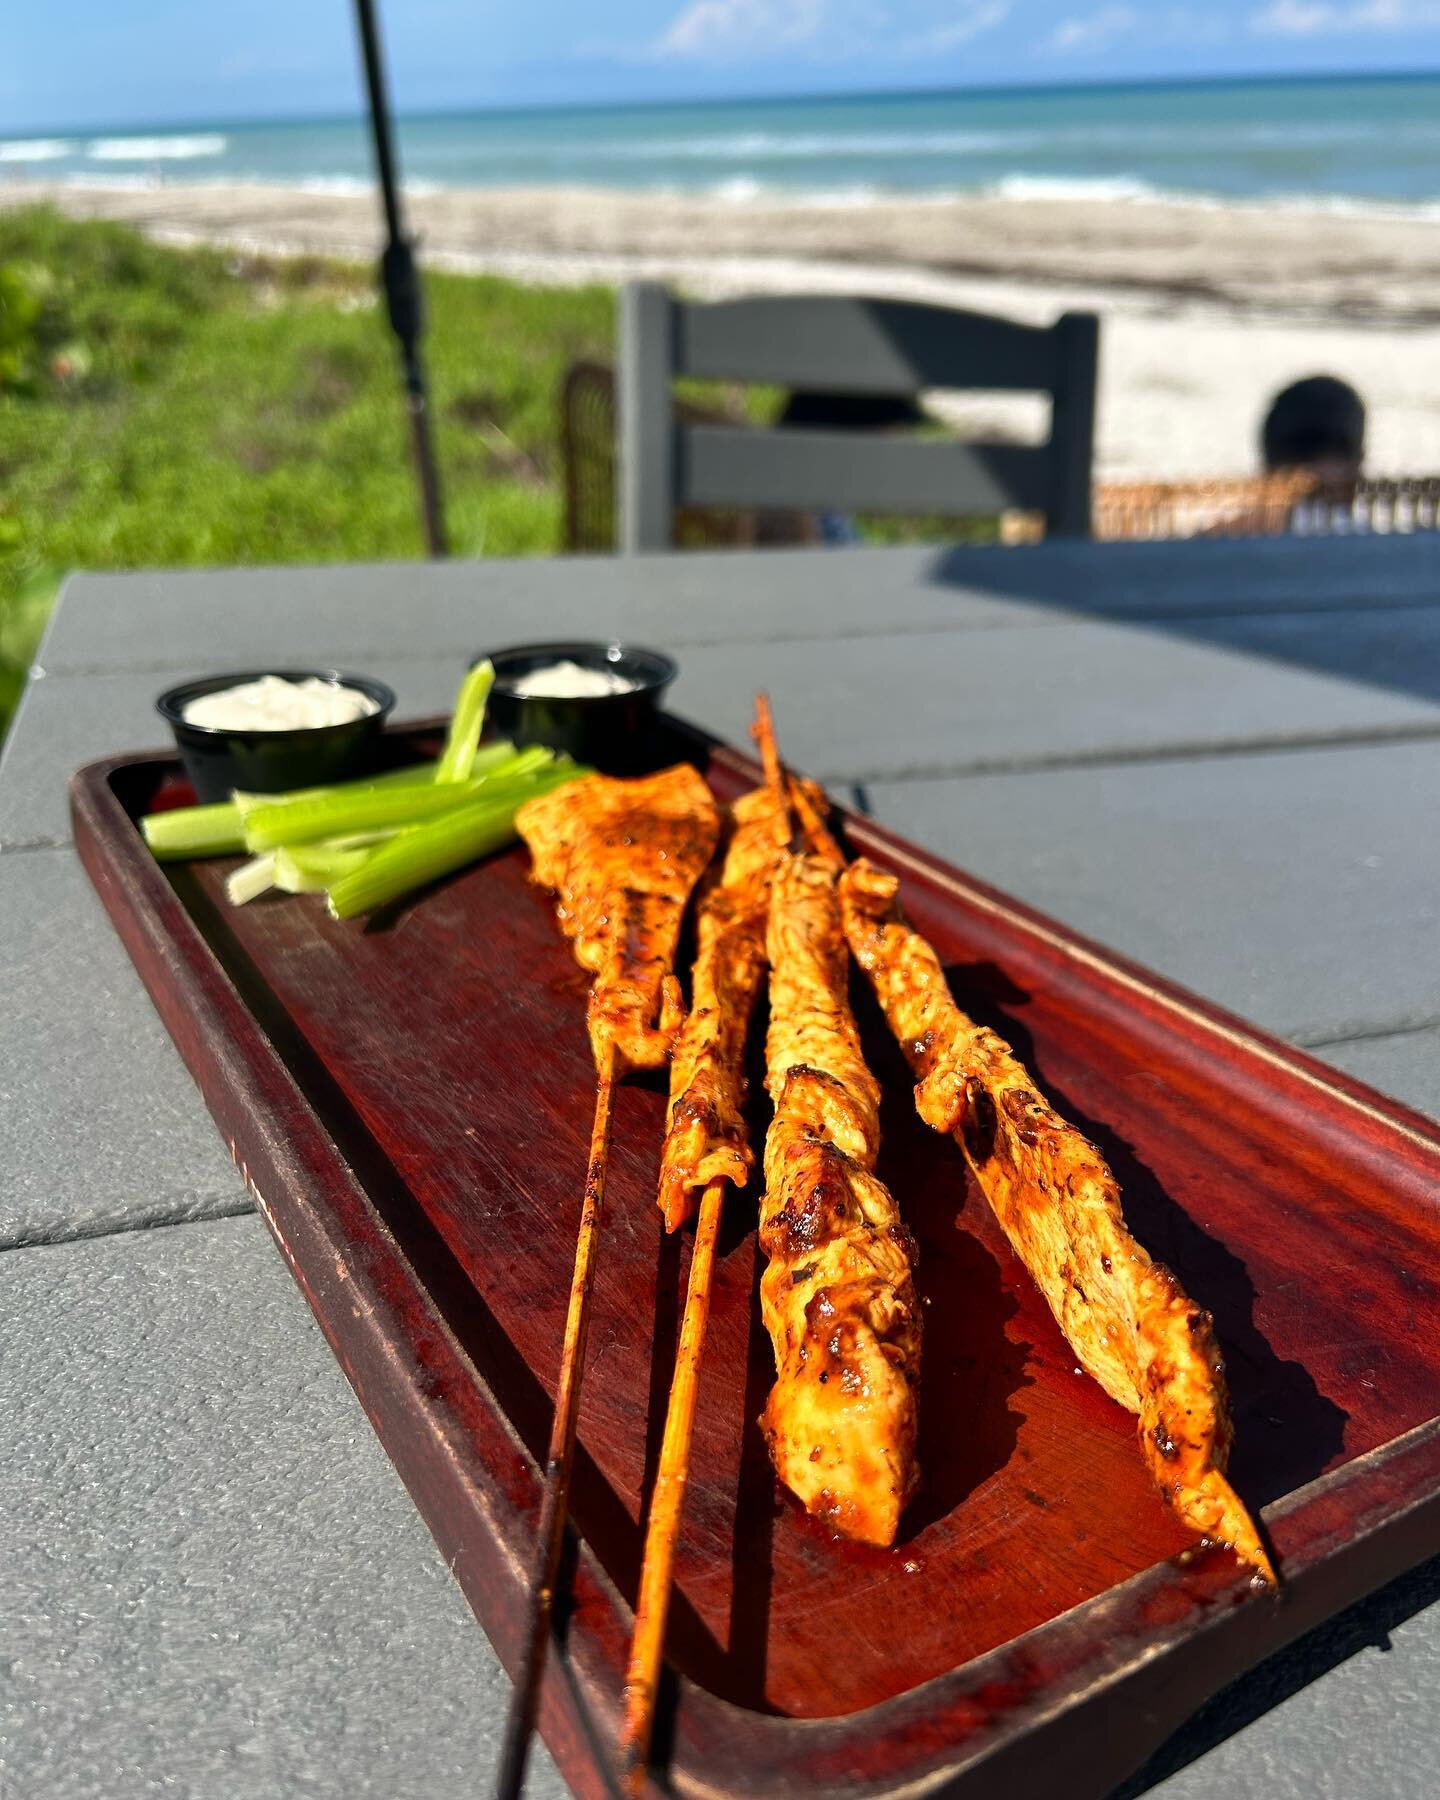 Buffalo chicken skewers are on our Features menu this weekend!!
A perfect bite on the beach!